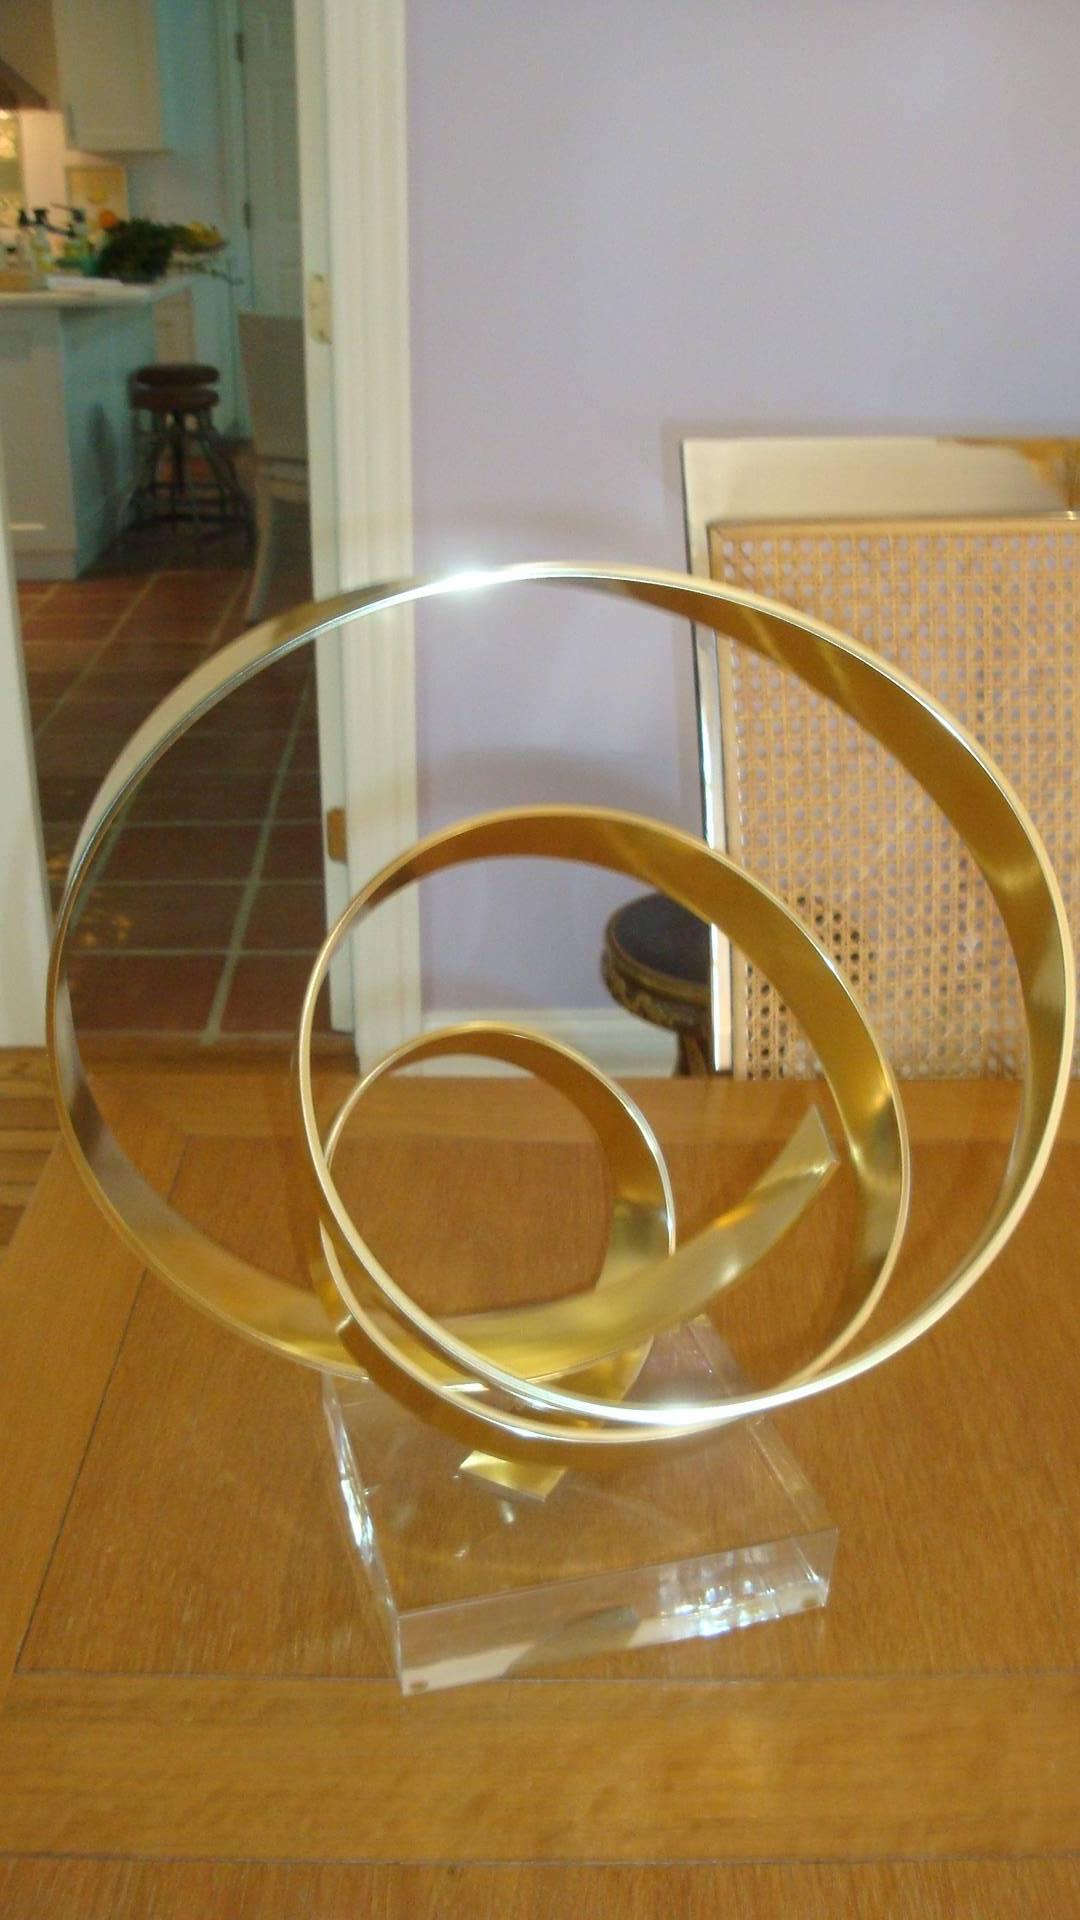 This is a 1979, brass abstract sculpture on Lucite by Dan Murphy.